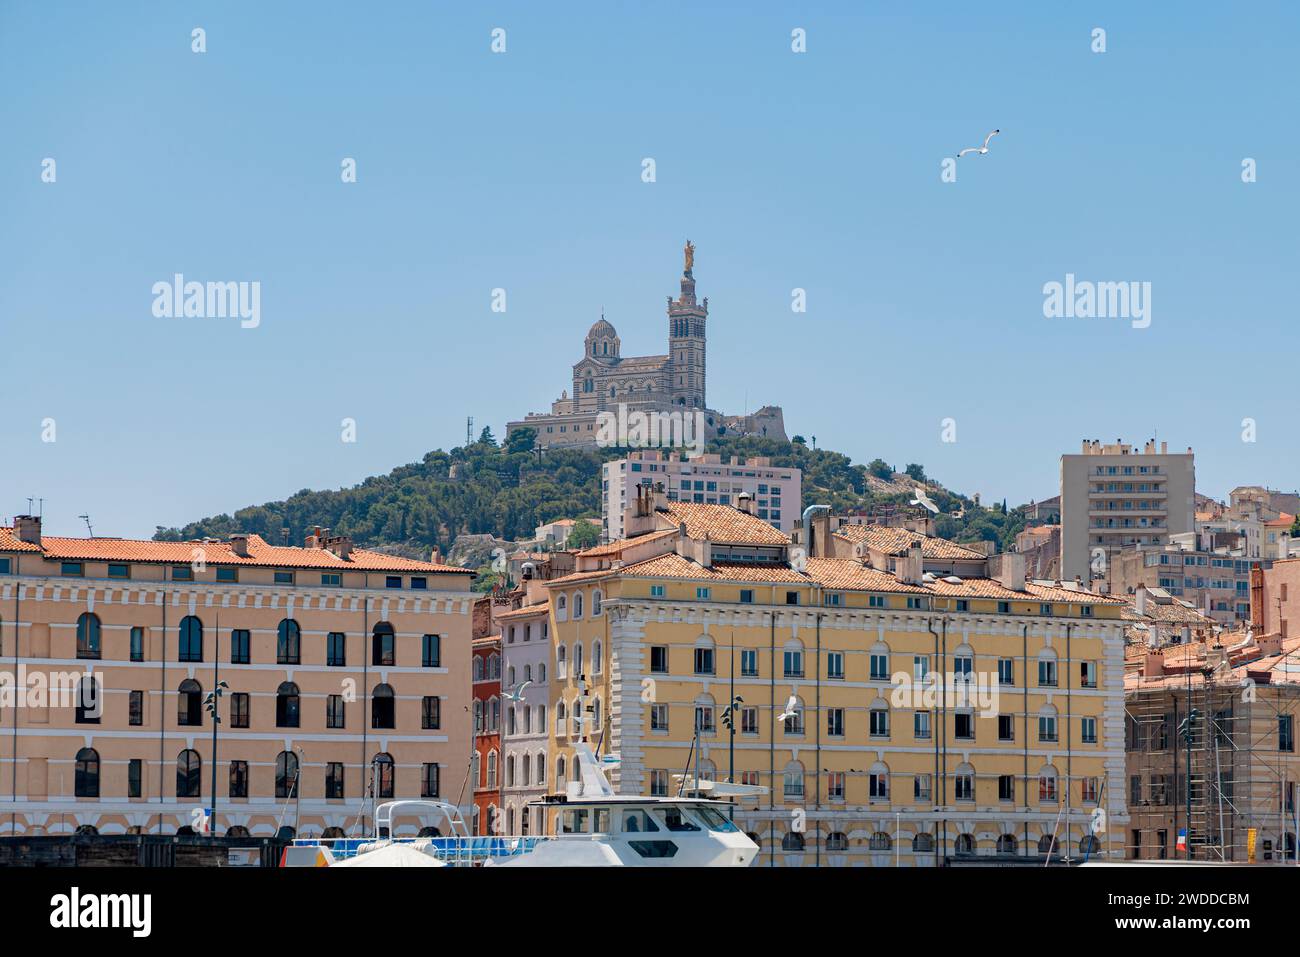 Photograph taken in the city of Marseille, France, featuring a view of Notre Dame de la Garde captured from the old port Stock Photo